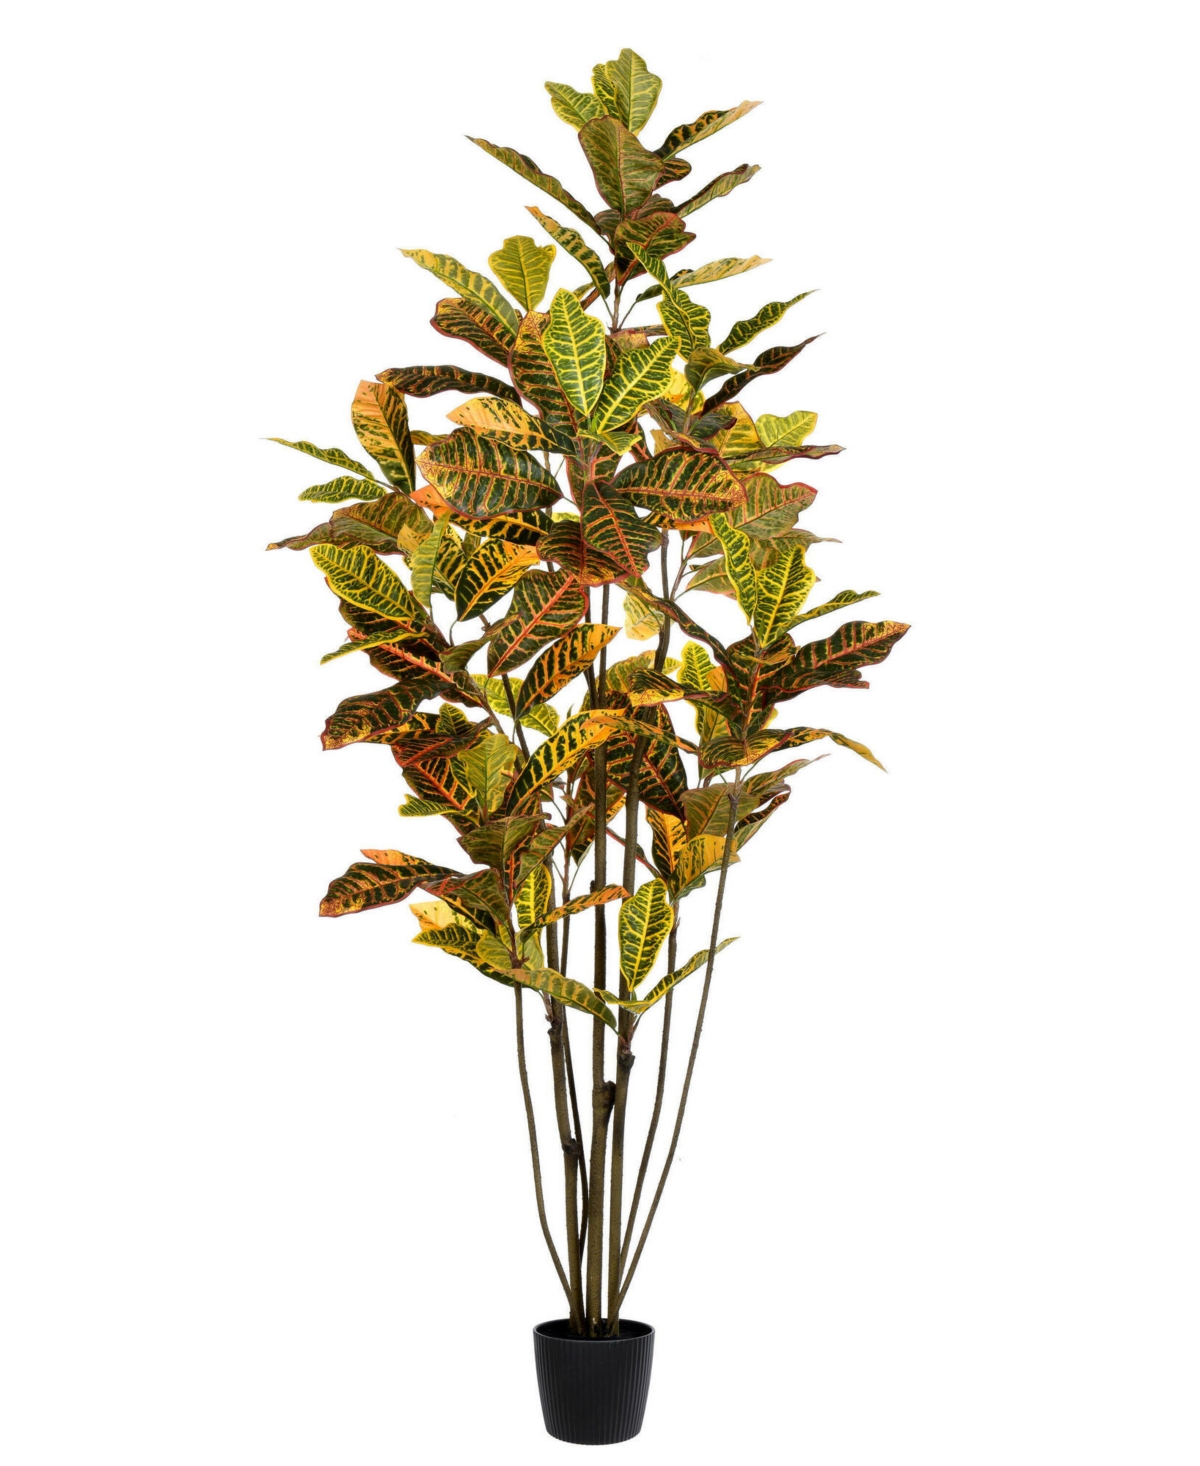 6' Potted Artificial Green and Orange Croton Tree